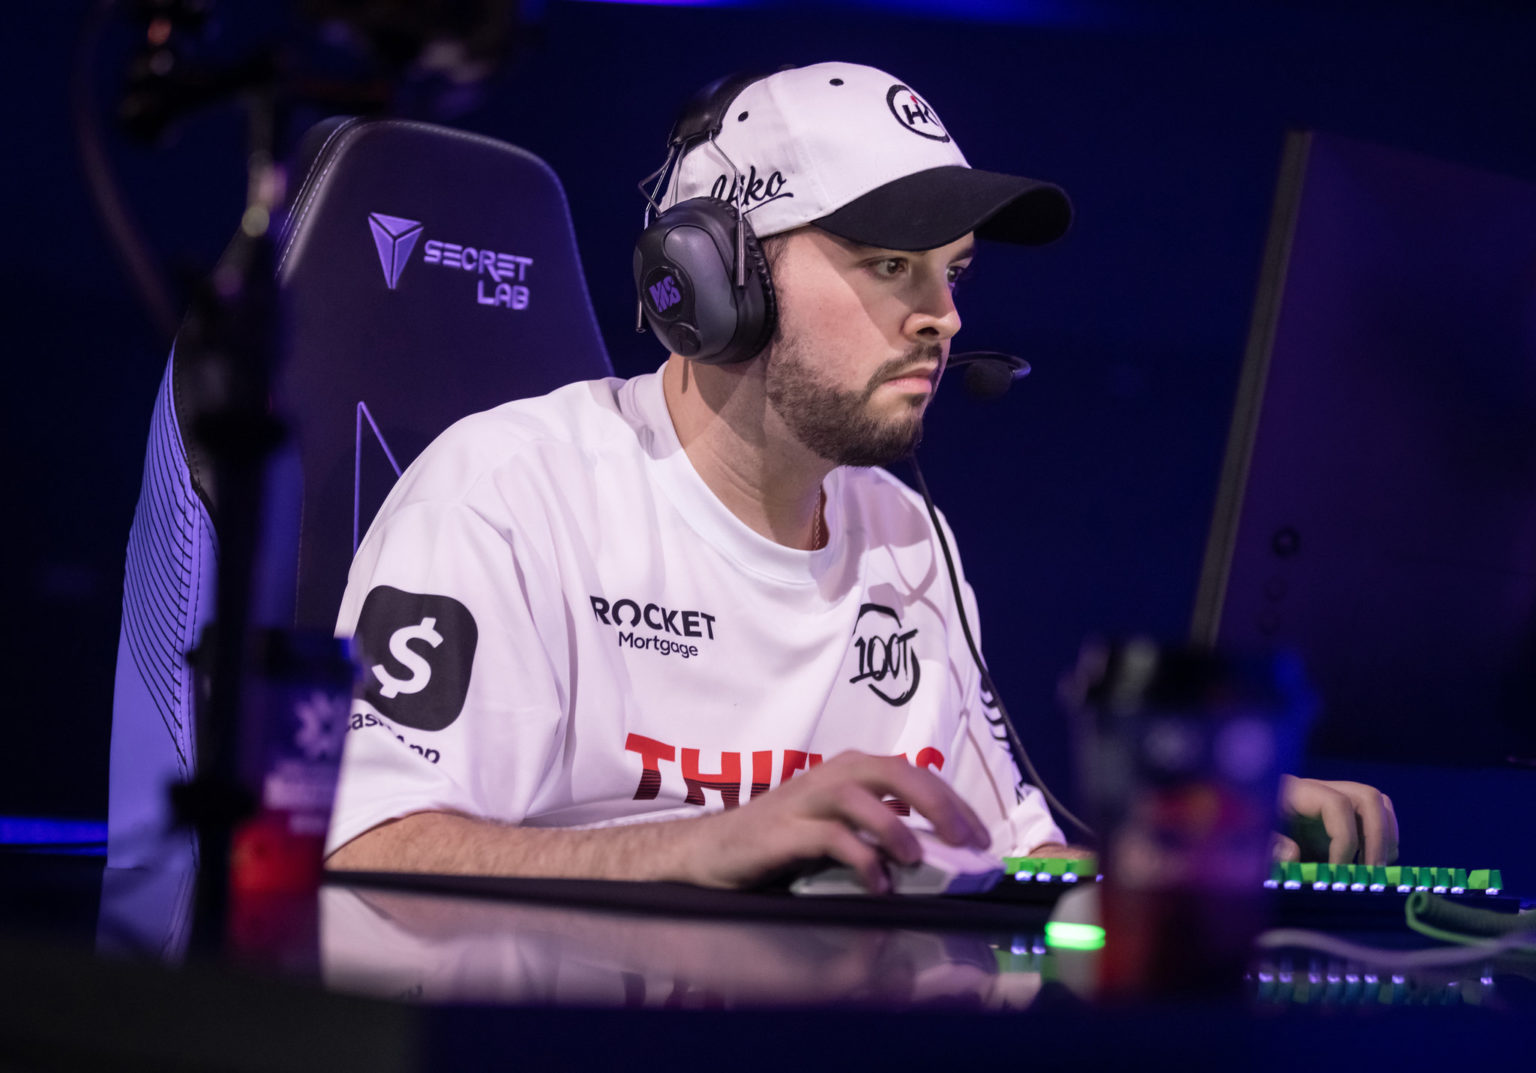 100 thieves hiko: 'the way sentinels plays prepares you for many different play styles'